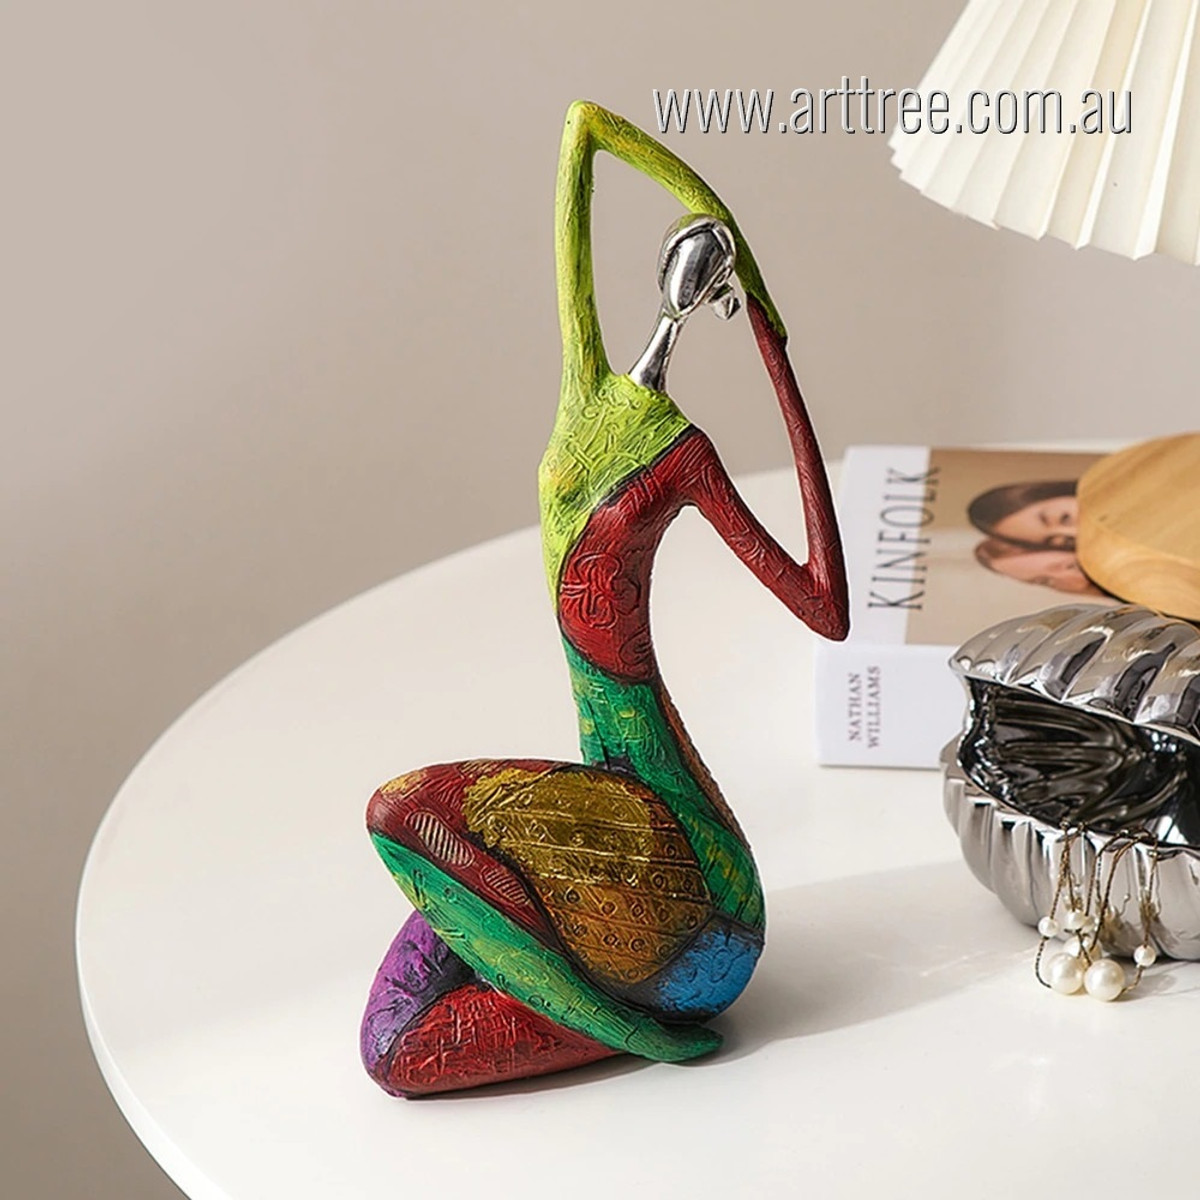 Colorful Lady Creative Abstract Figure Resin Art Sculptures For Sale House Decoration